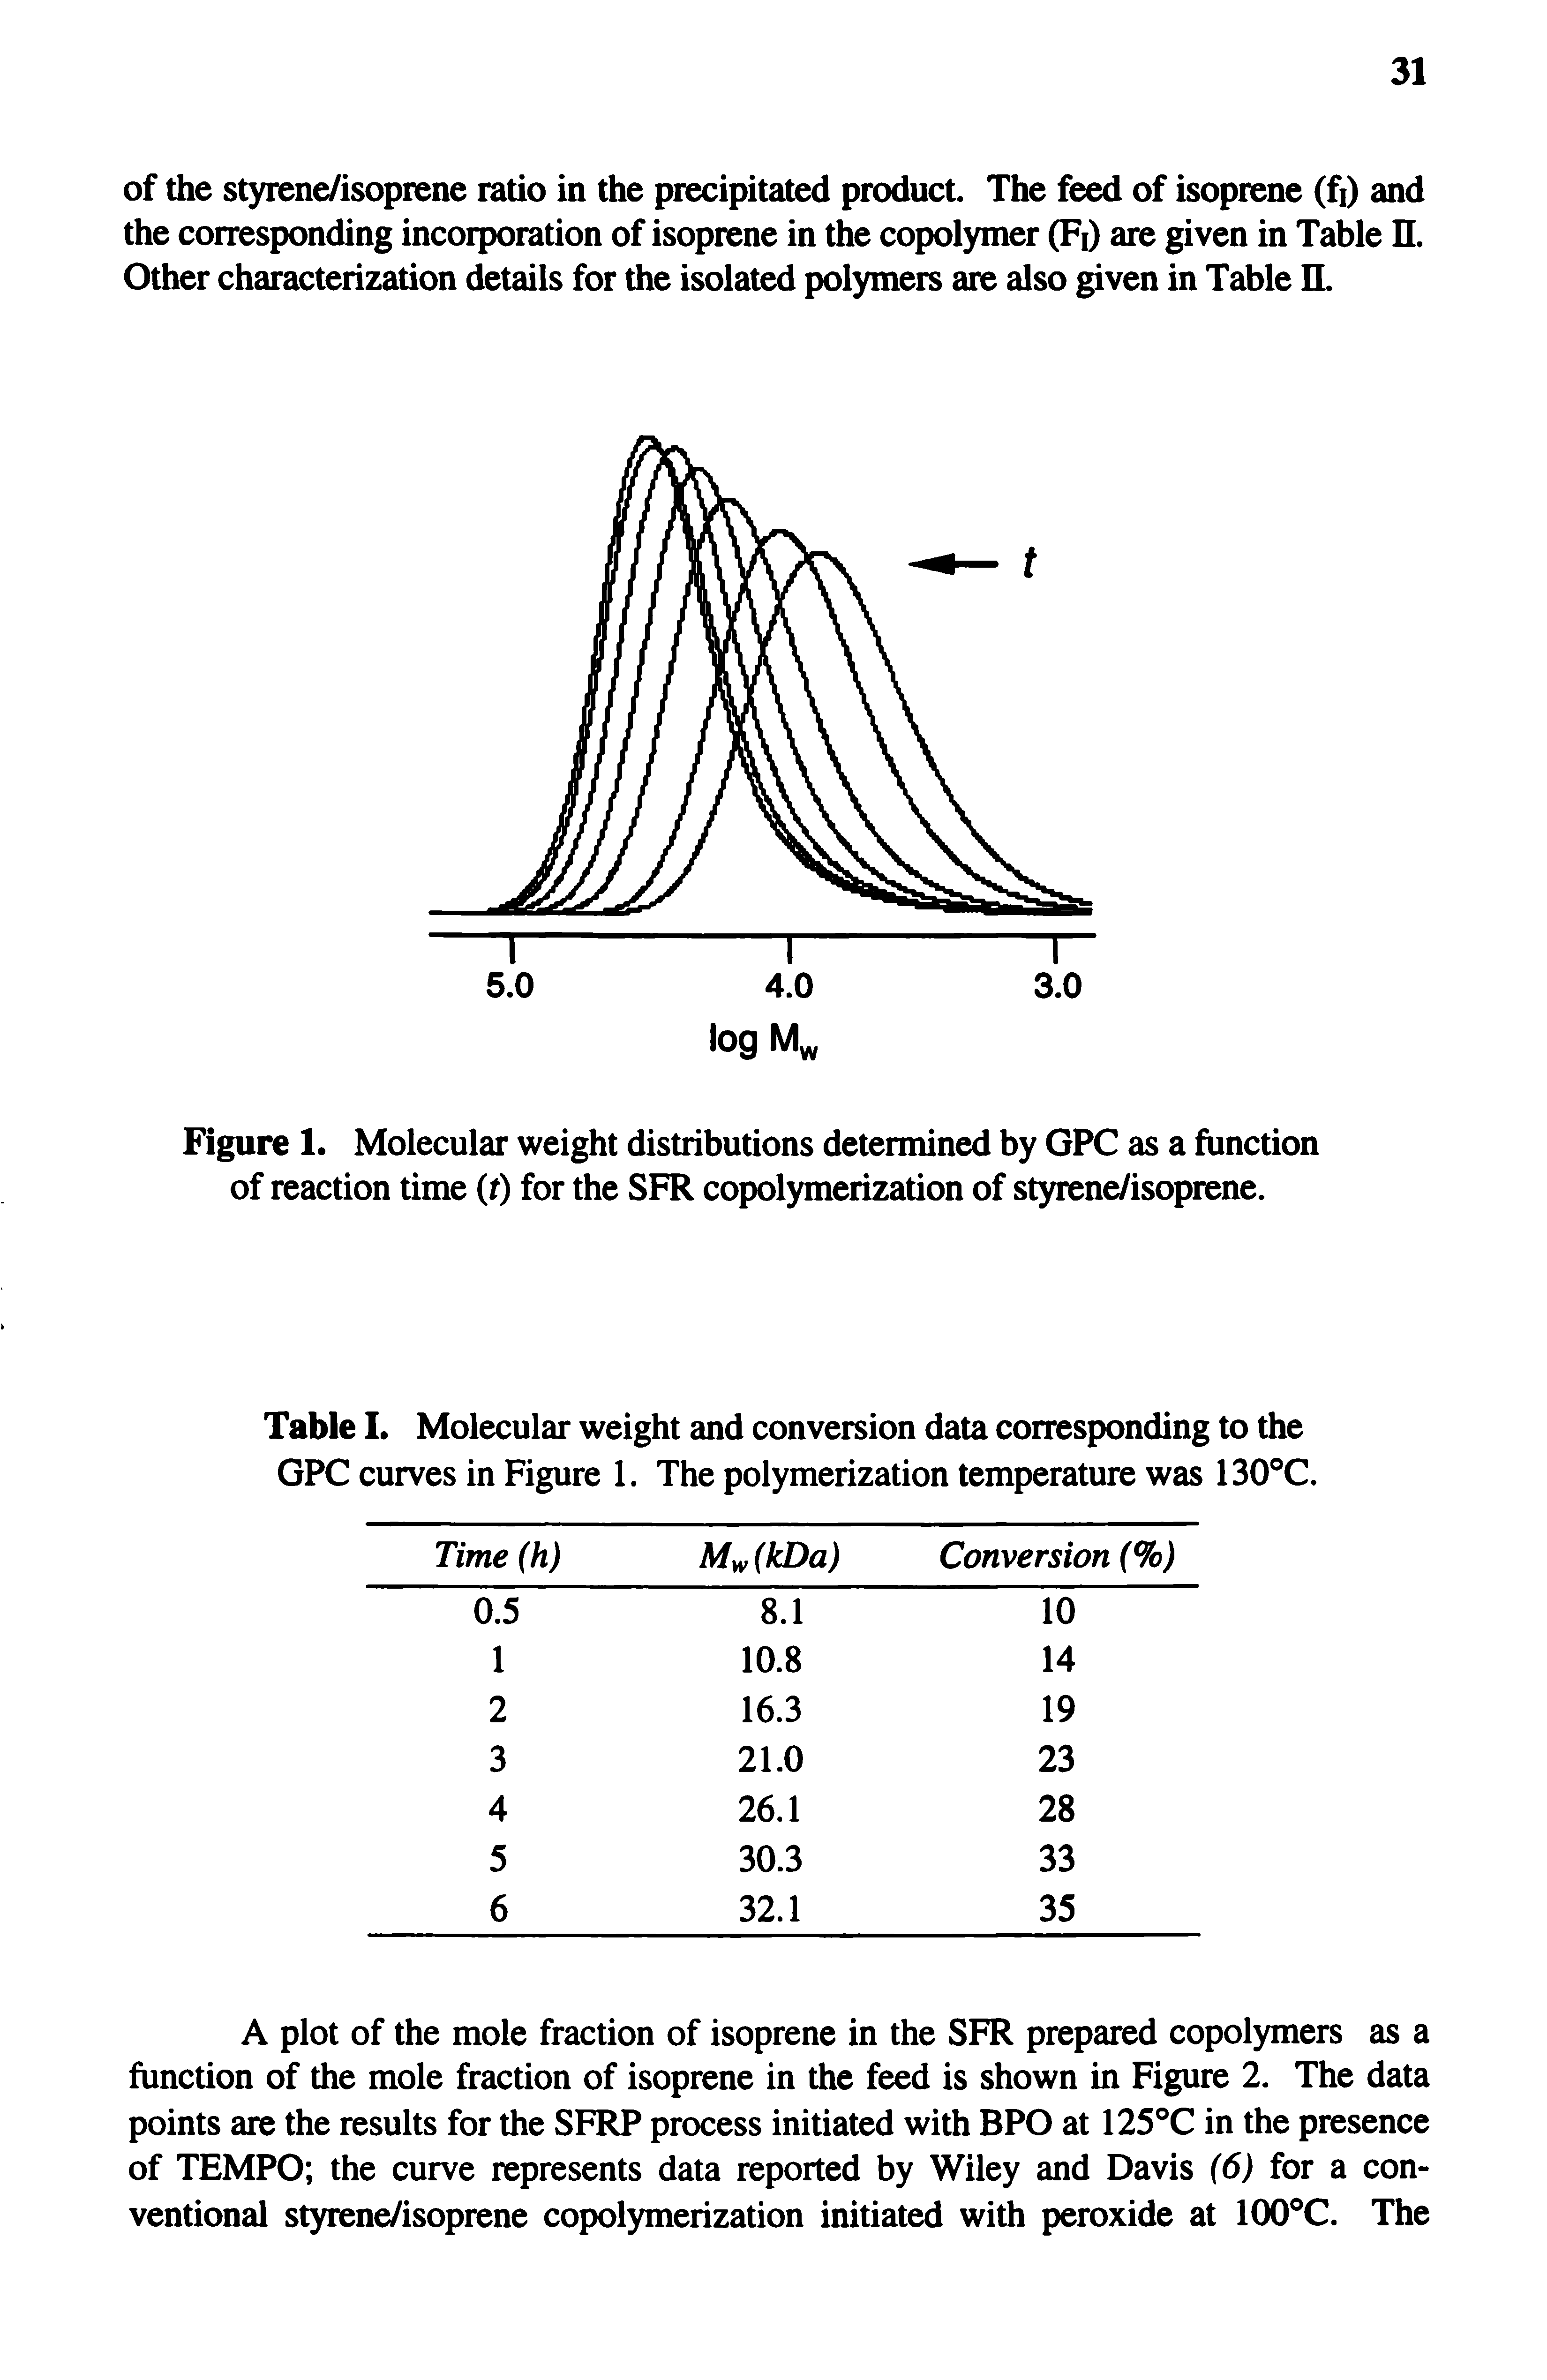 Figure 1. Molecular weight distributions determined by GPC as a function of reaction time (t) for the SFR copolymerization of styrene/isoprene.